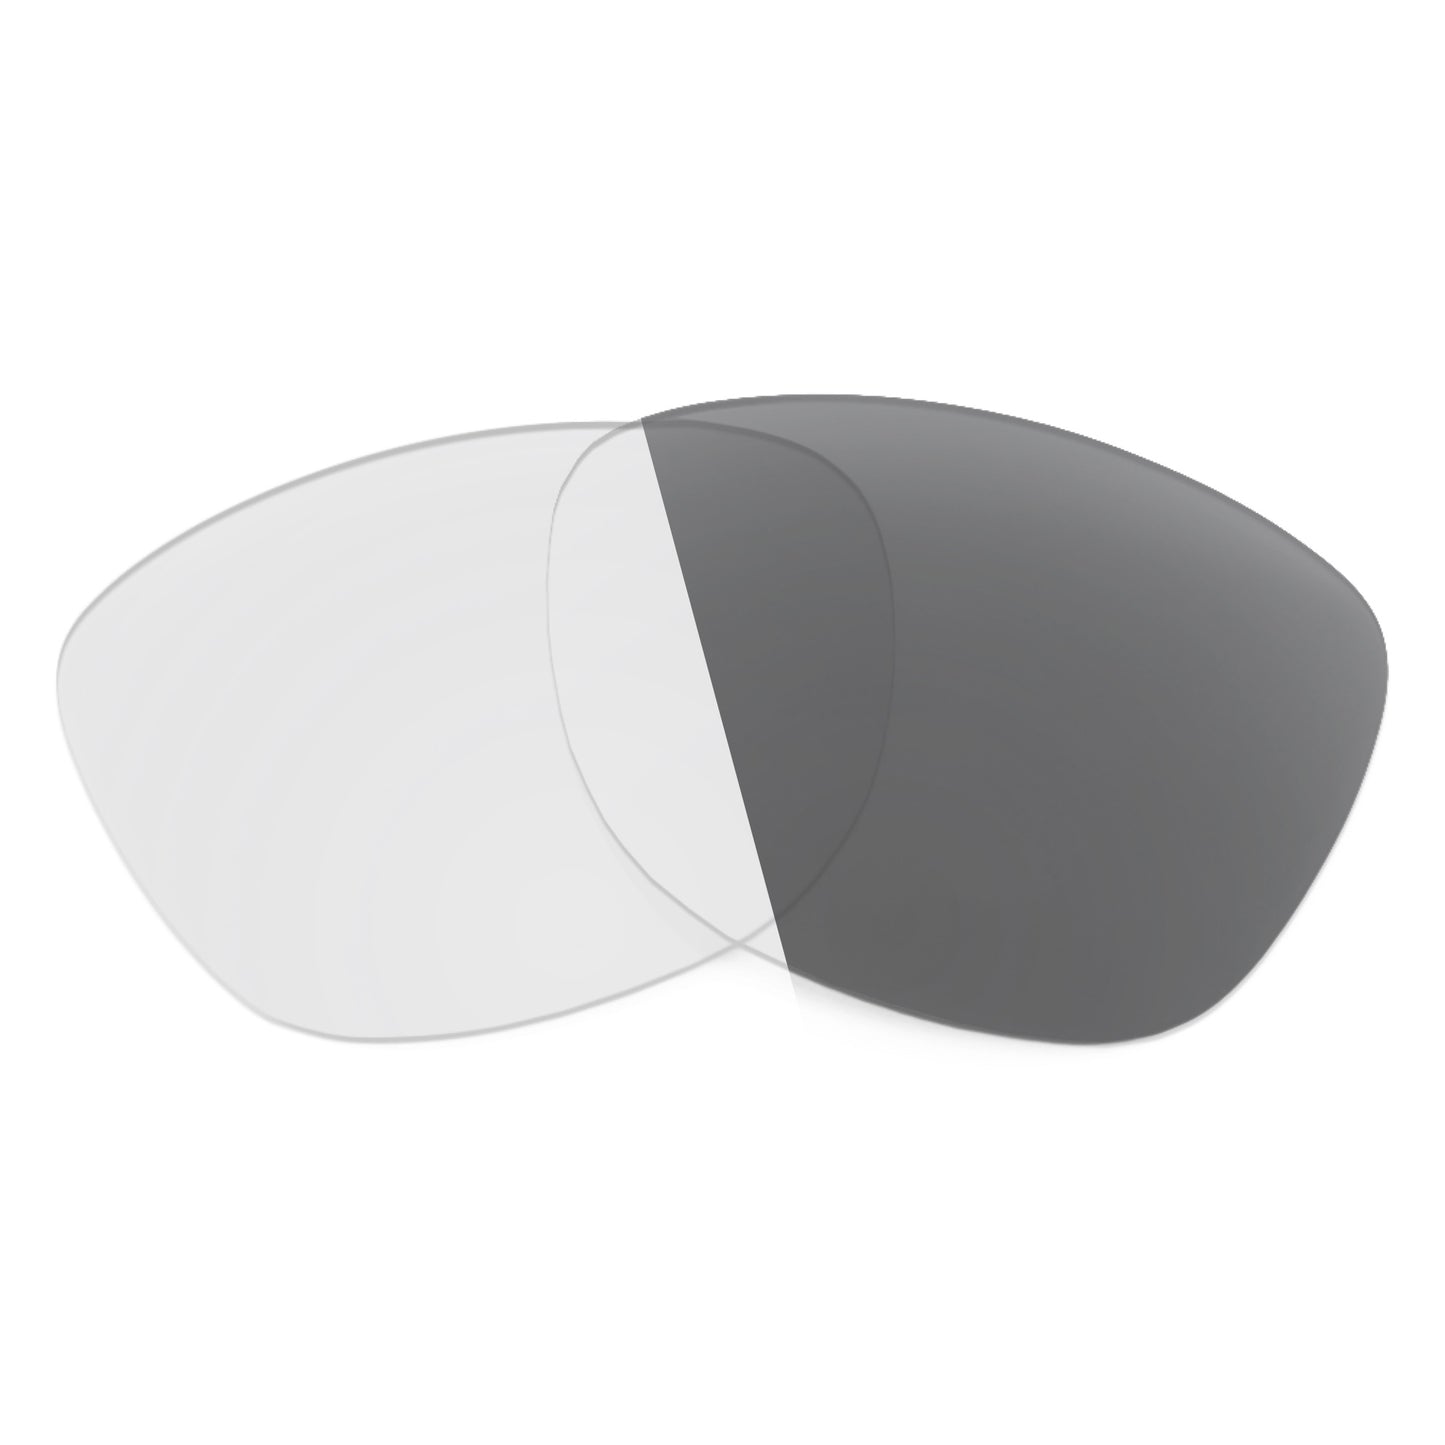 Revant replacement lenses for Ray-Ban Clubmaster Oversized RB4175 57mm Non-Polarized Adapt Gray Photochromic